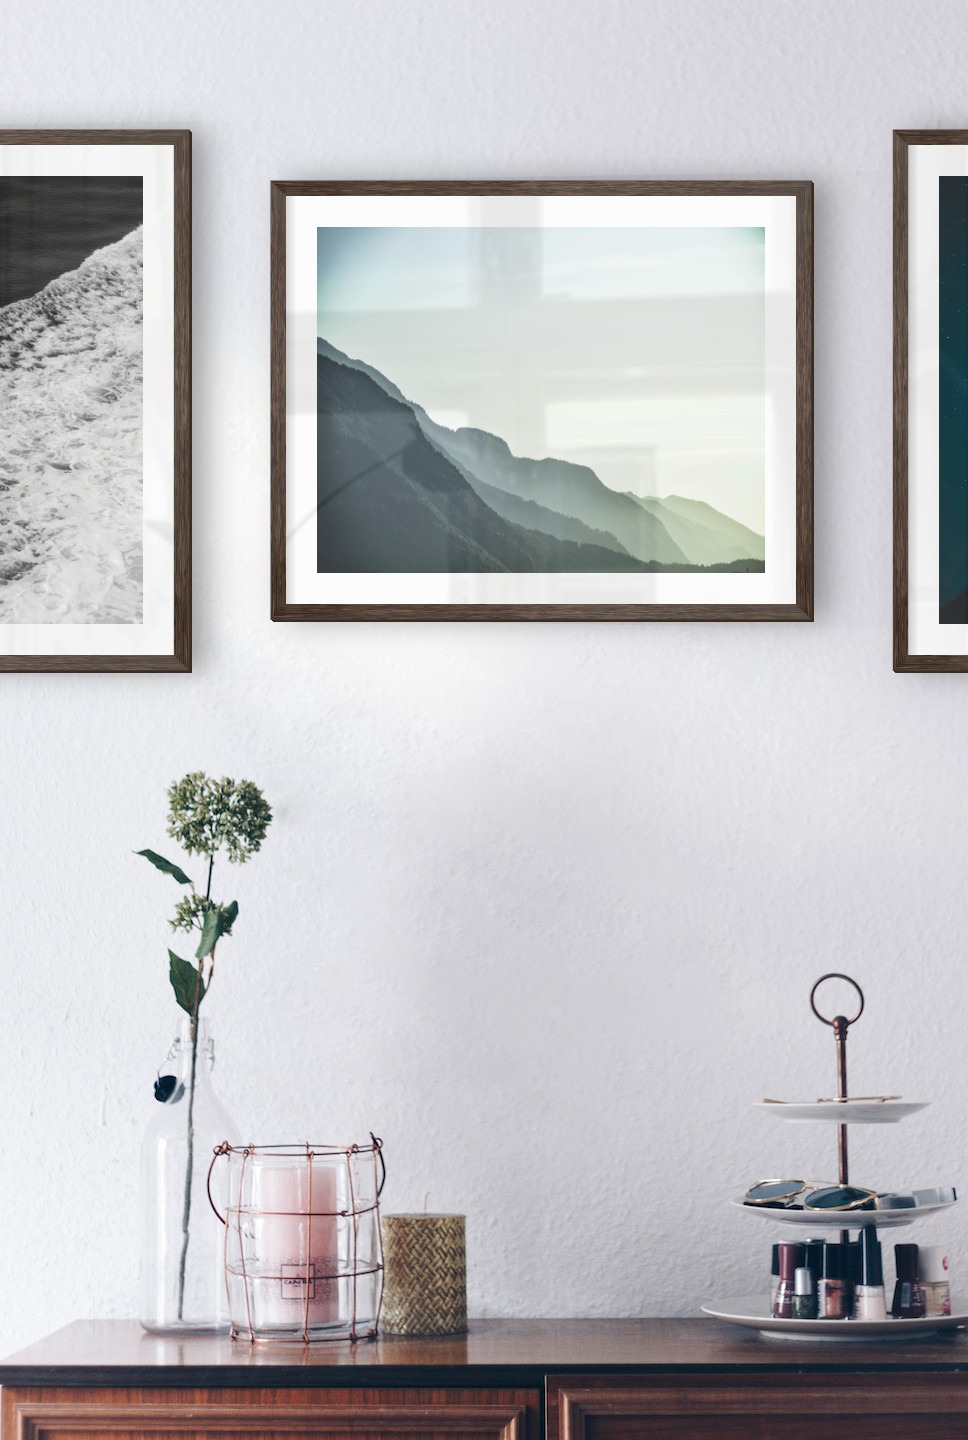 Gallery wall with picture frames in dark wood in sizes 50x50 and 40x50 with prints "Swell from waves", "Foggy mountain" and "Jar in front of space"